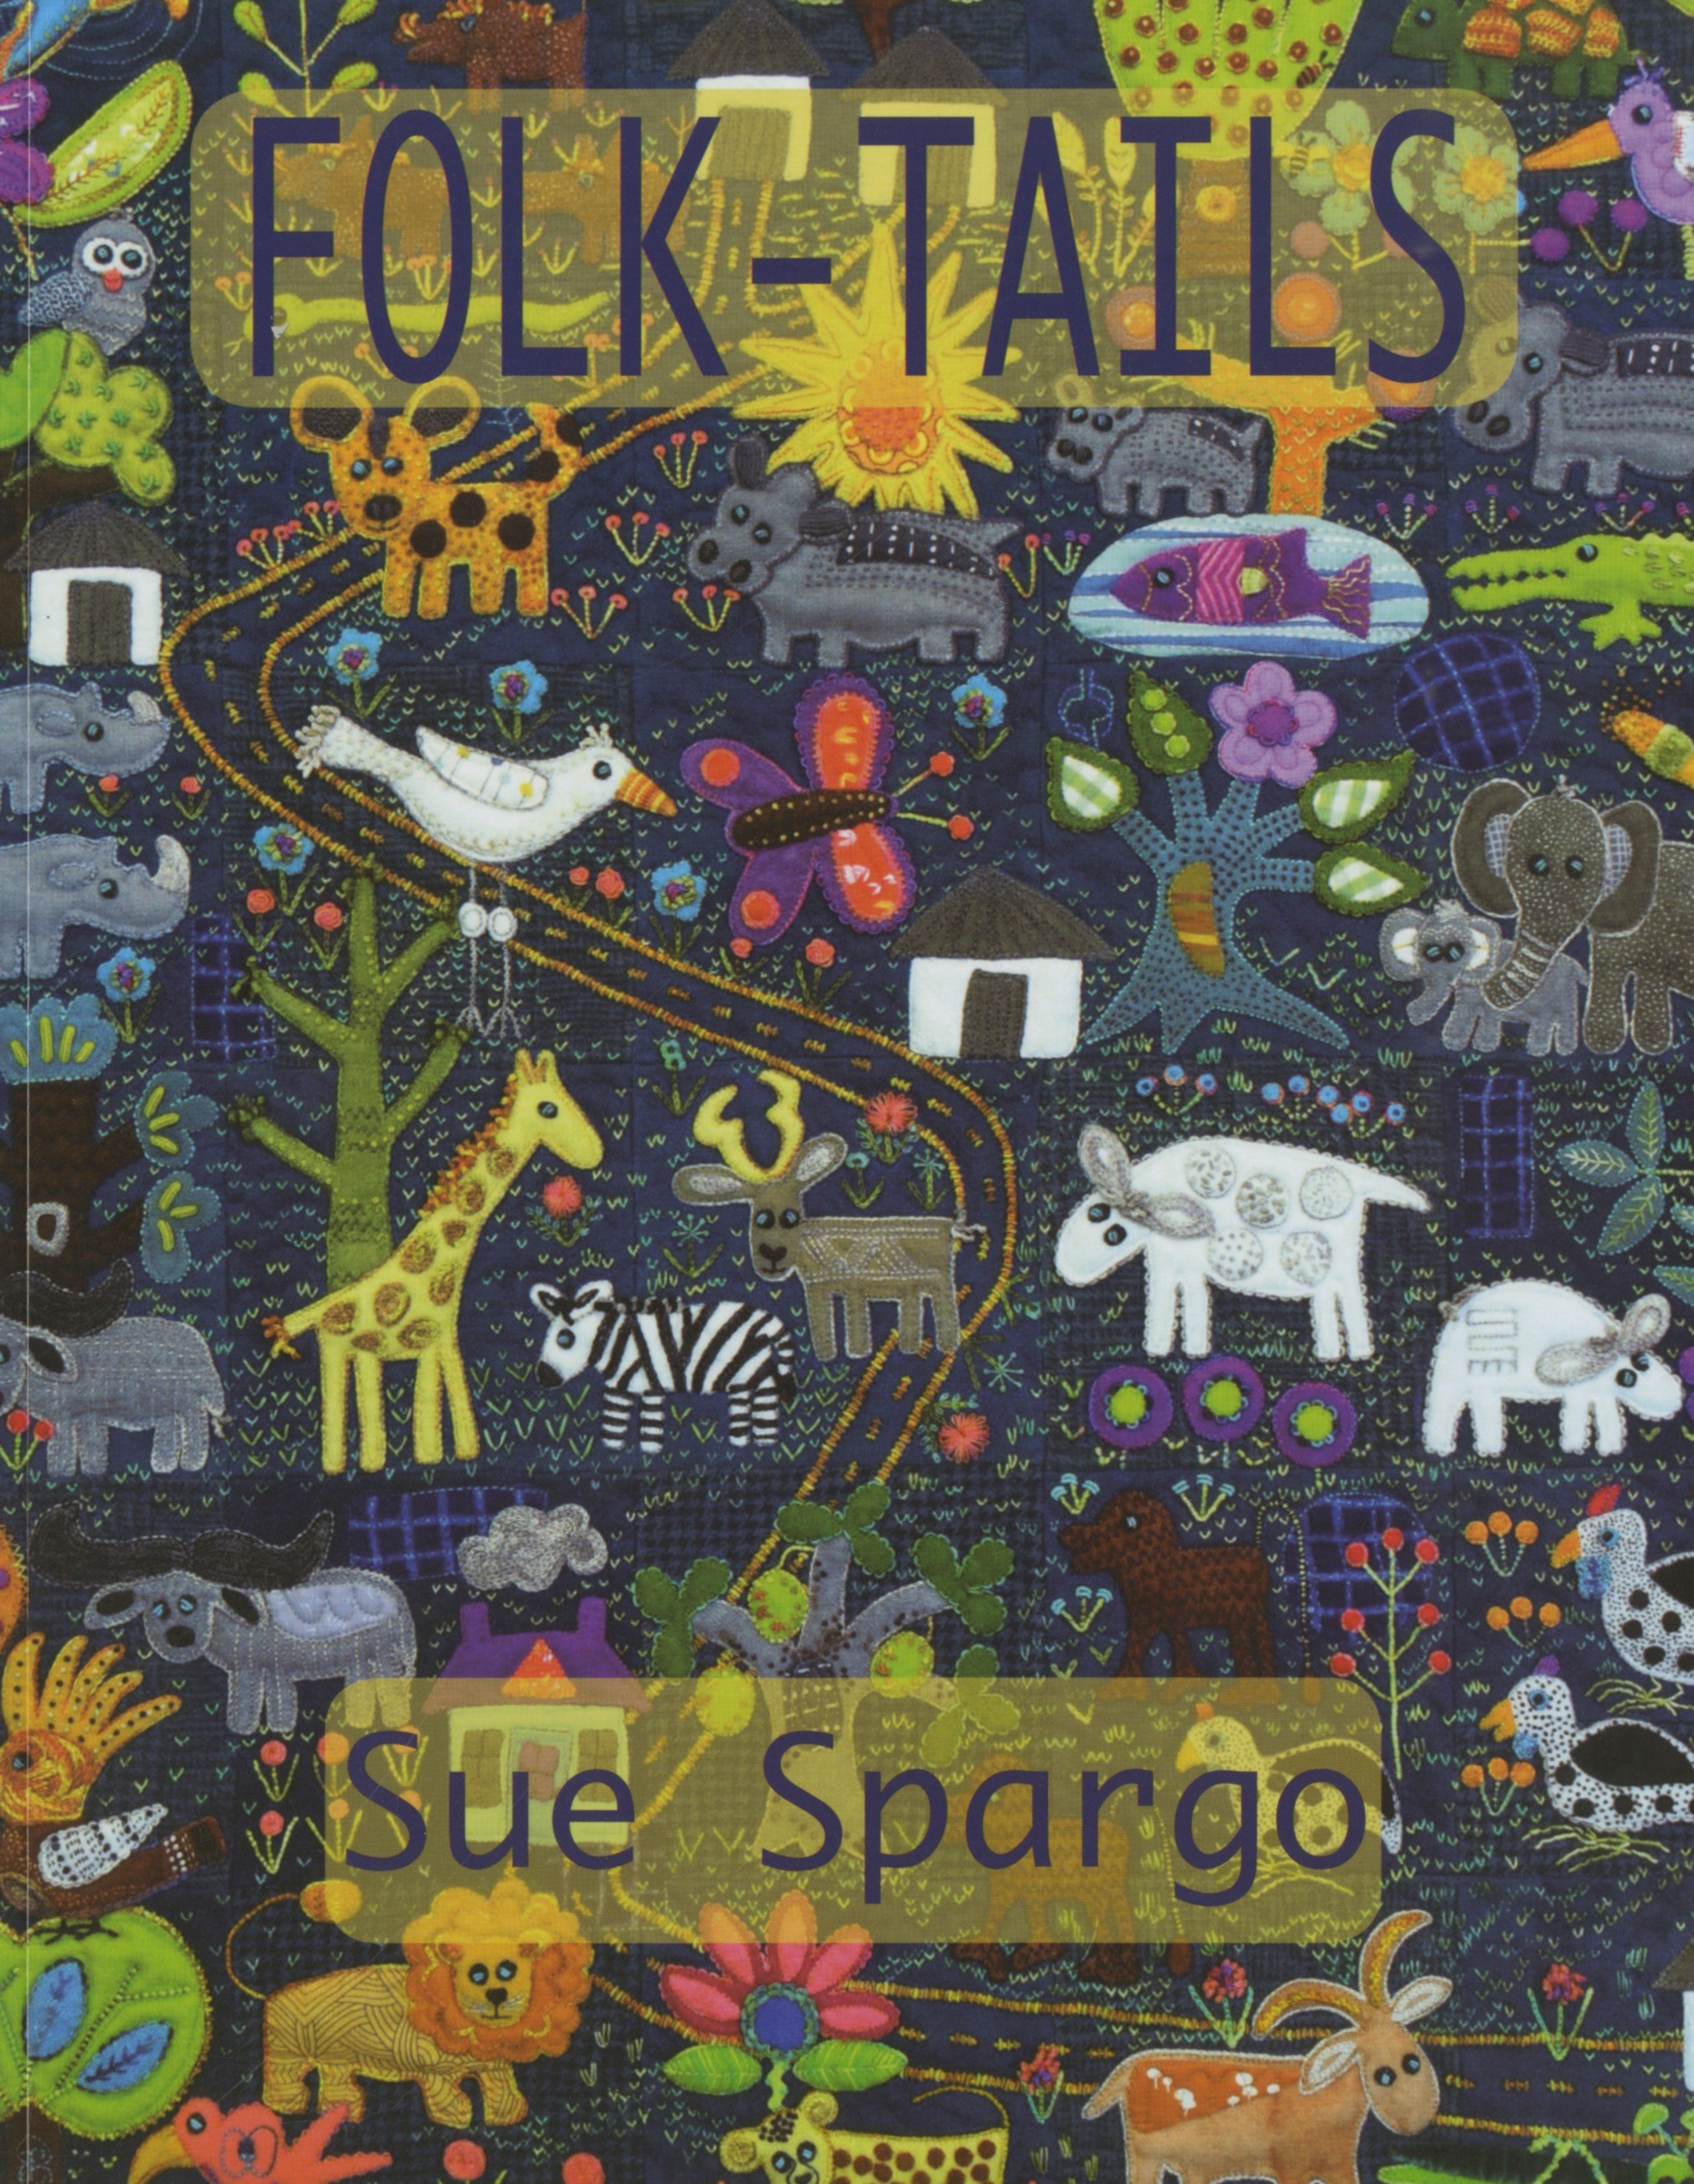 Folk-Tails - Applique, Embroidery, and Quilt Pattern Book by Sue Spargo of Folk Art Quilts